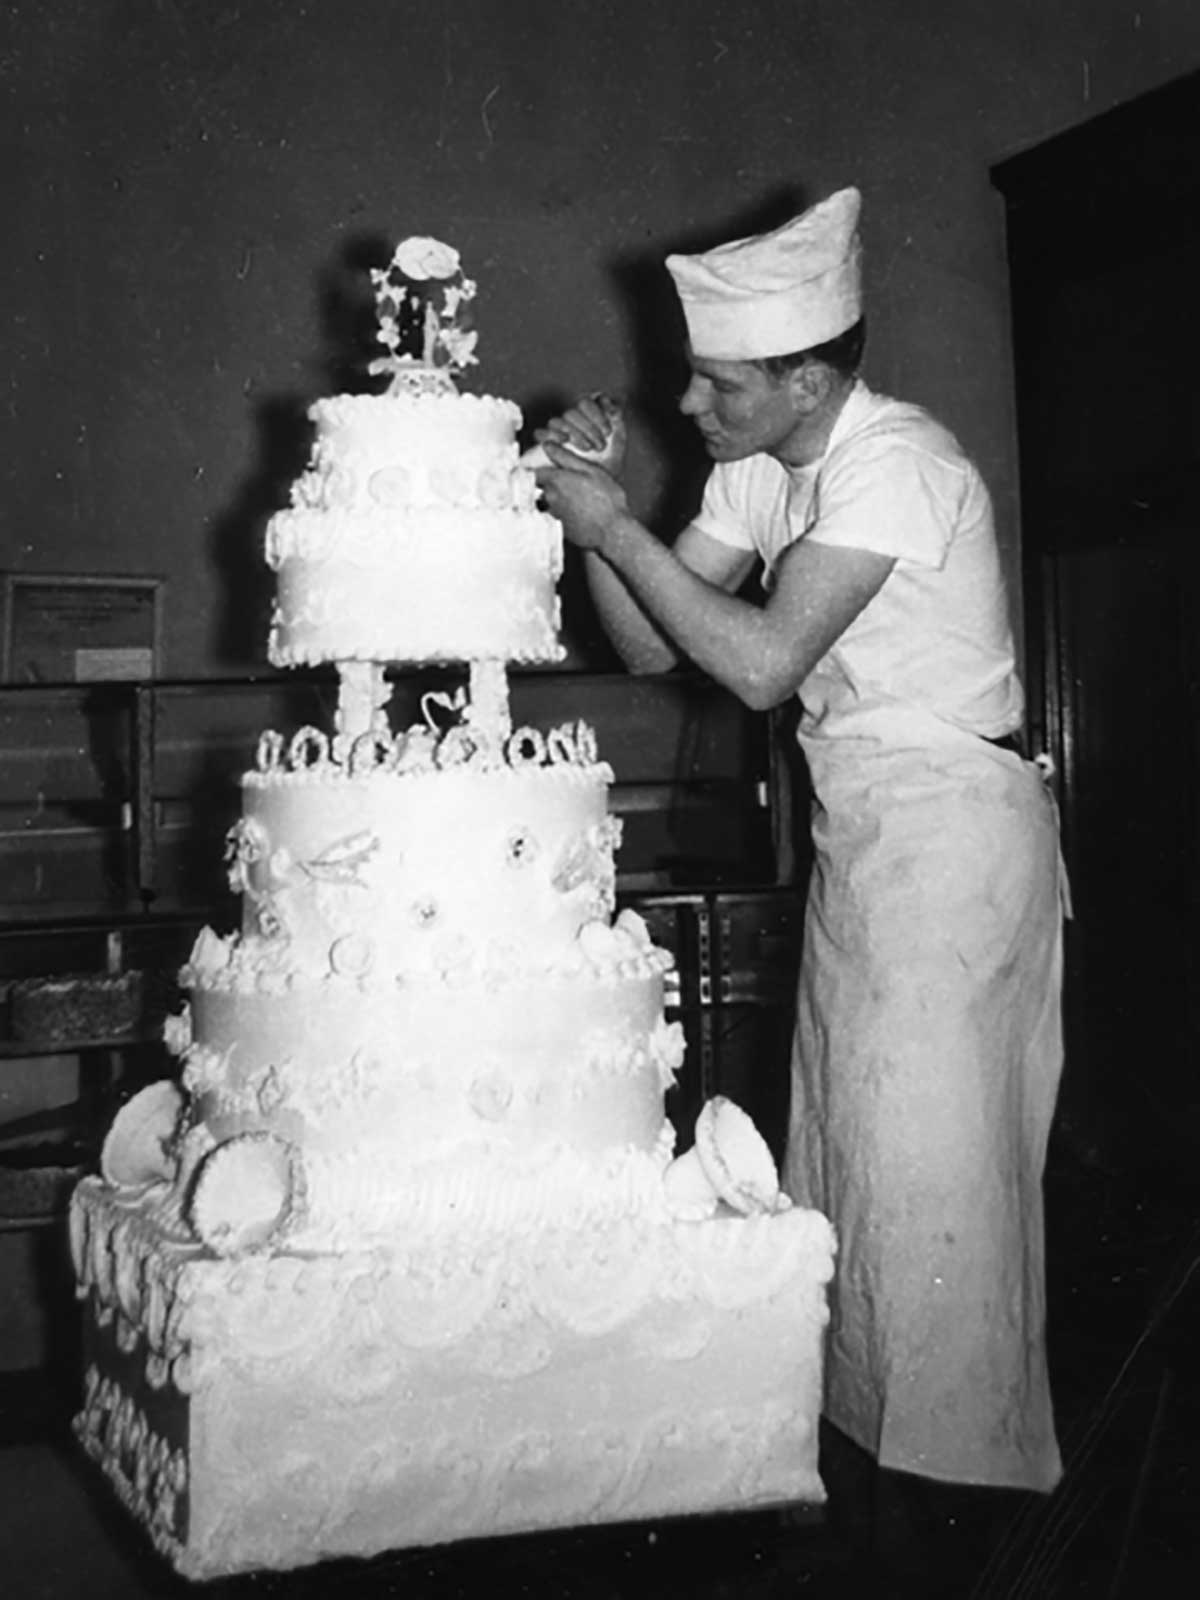 Norm decorating a cake